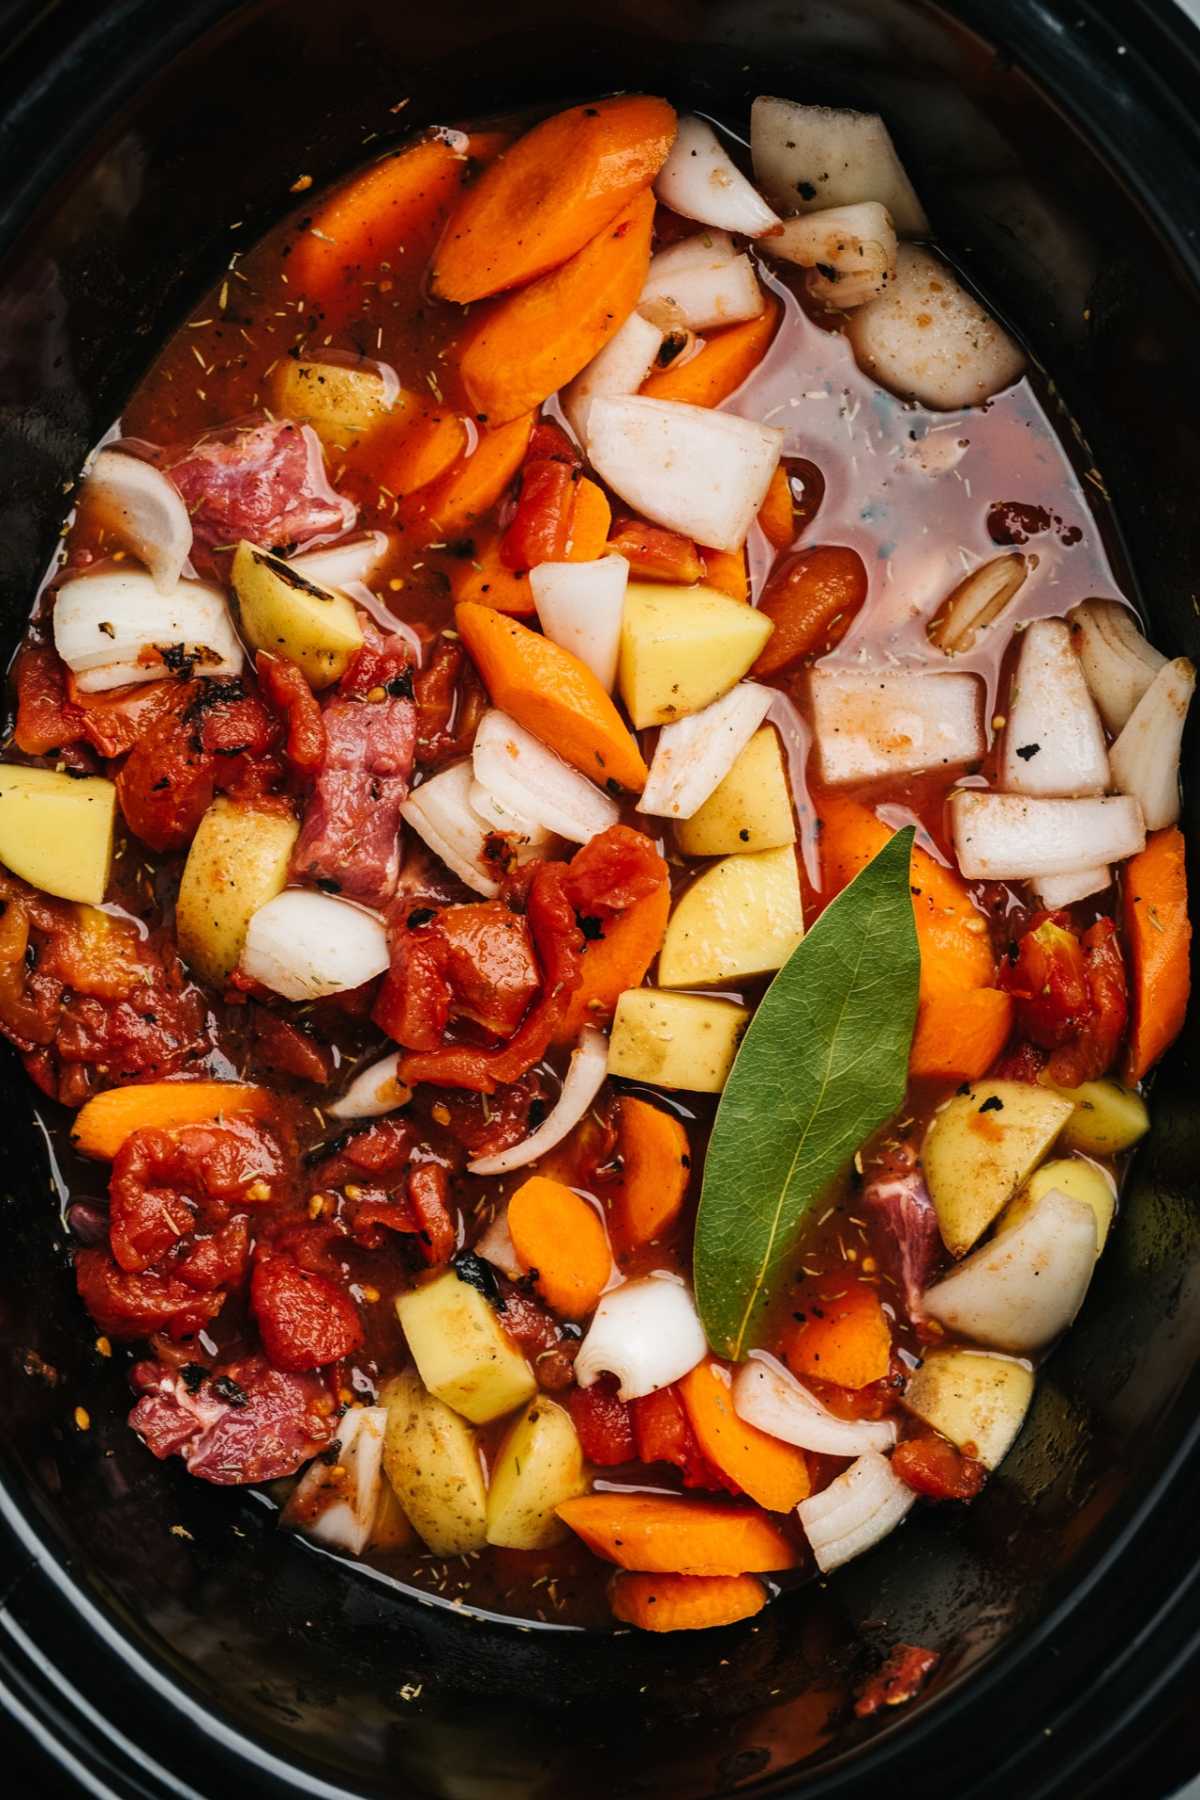 Carrots, onions, beef and potatoes in a crockpot.